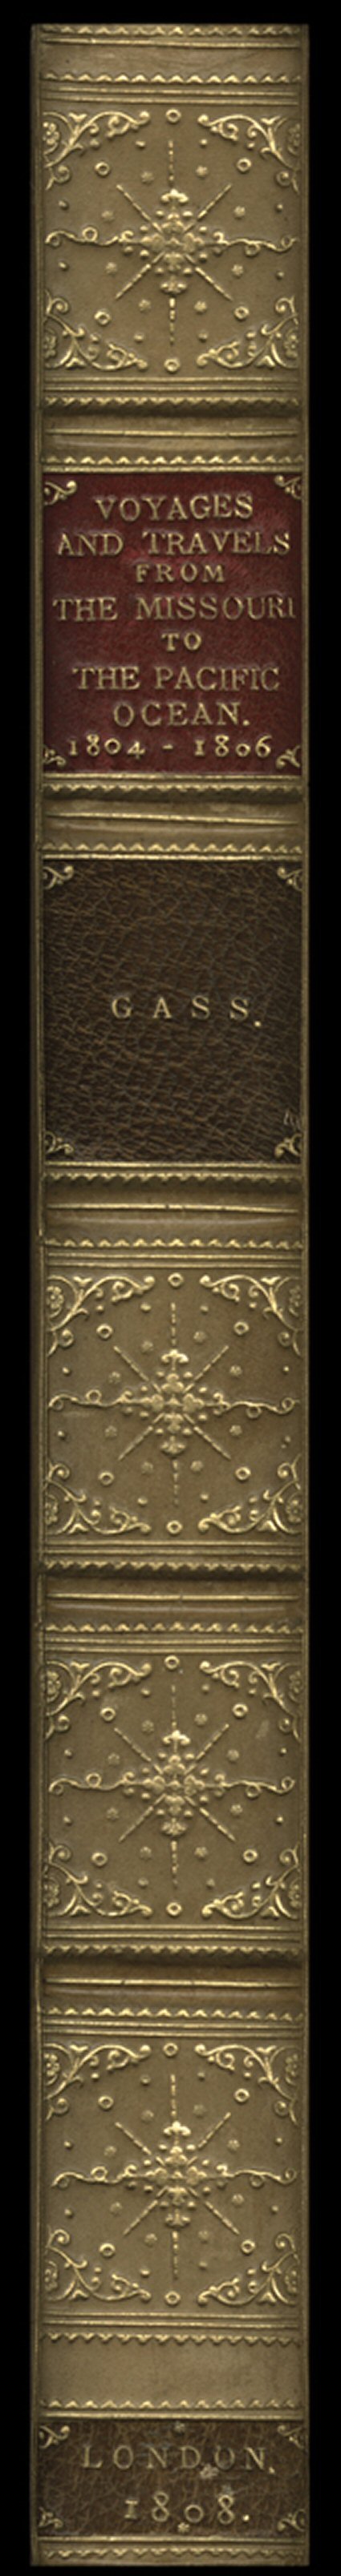 A Journal of the Voyages and Travels of a Corps of Discovery Under the Command of Captain Lewis and Captain Clarke., Patrick Gass. London, J. Budd, 1808 (from Pittsburgh, David
MKeehan, 1807). First English edition. 8vo, later full calf with